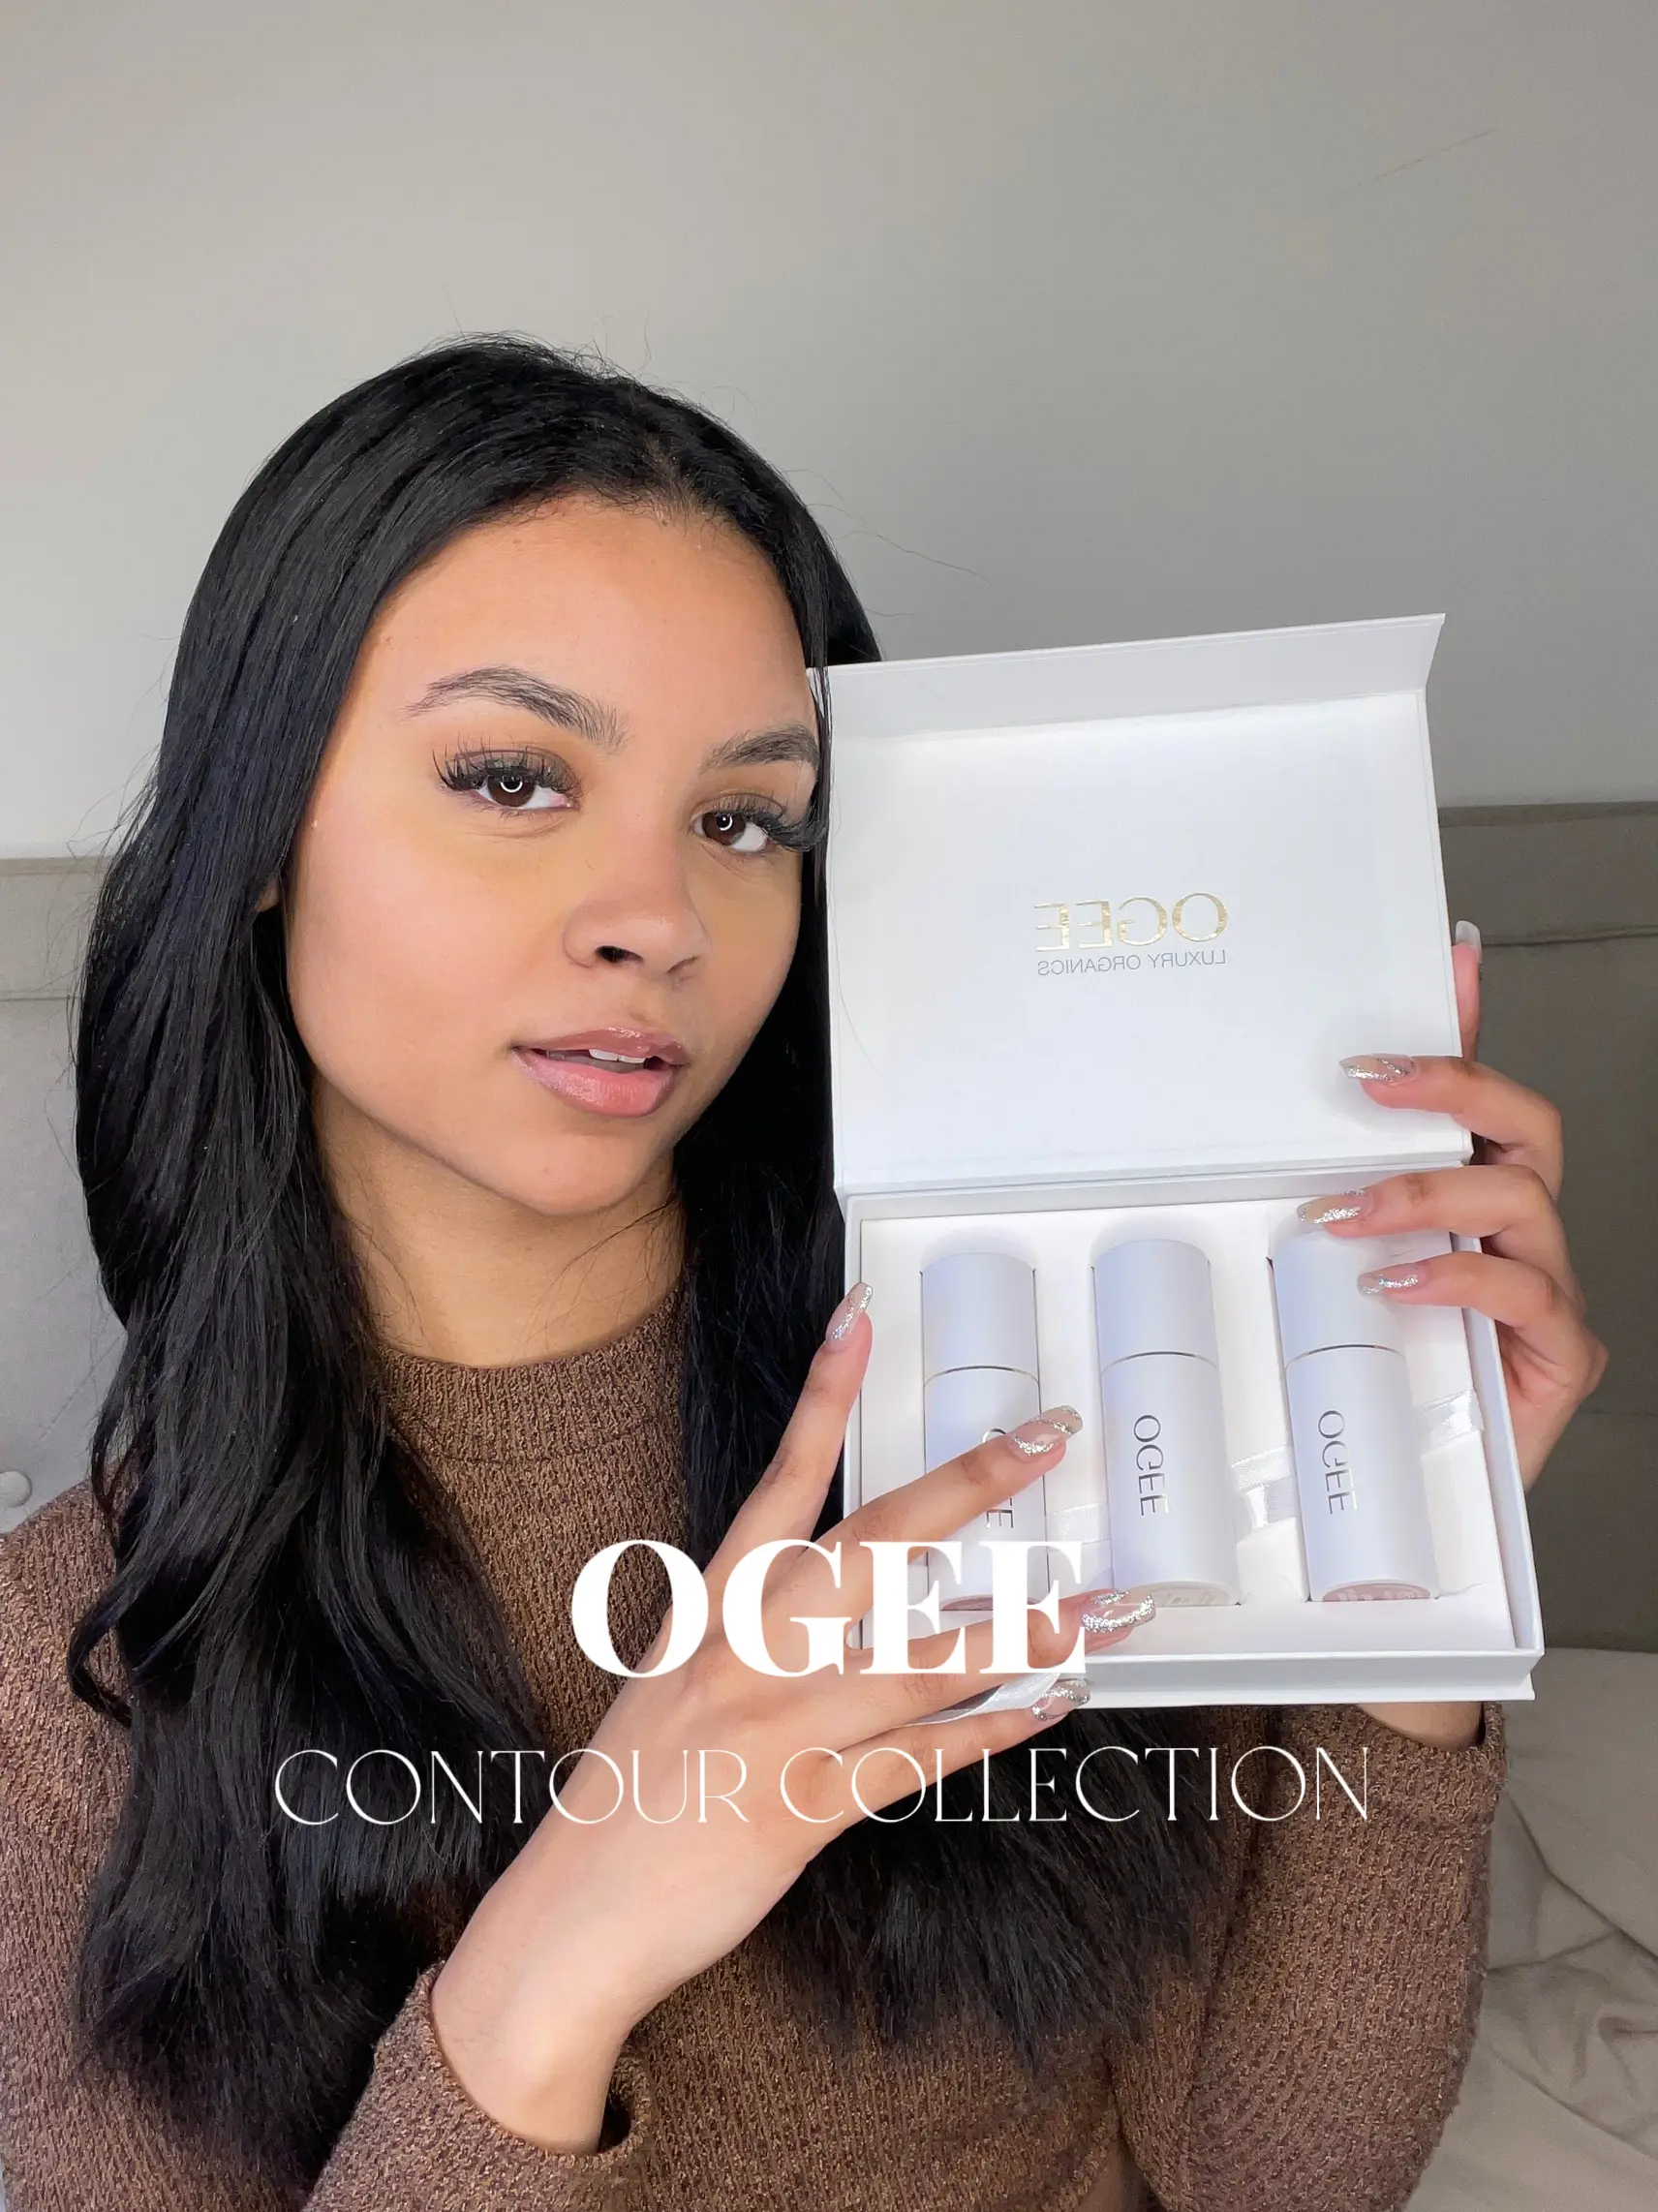 Ogee Contour Collection Swatches & Review ✨